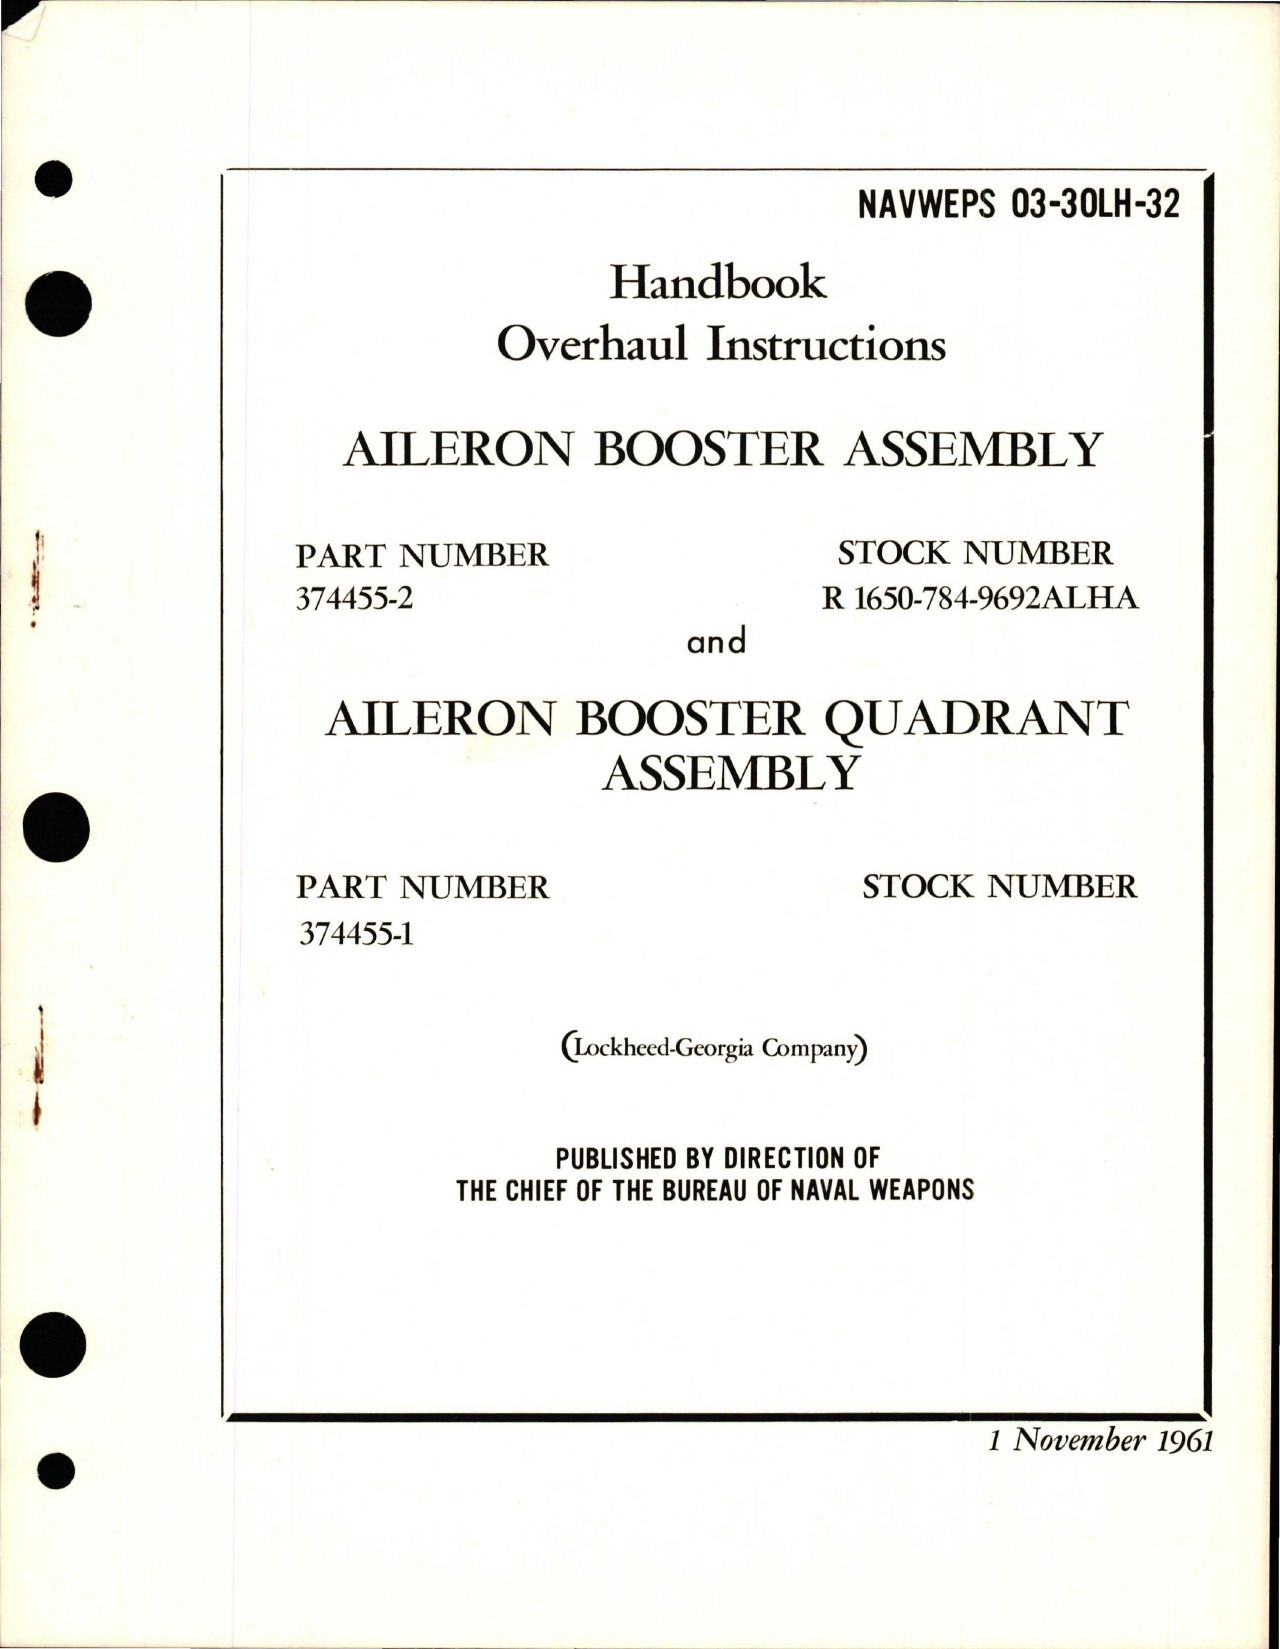 Sample page 1 from AirCorps Library document: Overhaul Instructions for Aileron Booster Assy and Aileron Booster Quadrant Assembly - Parts 374455-1 and 374455-2